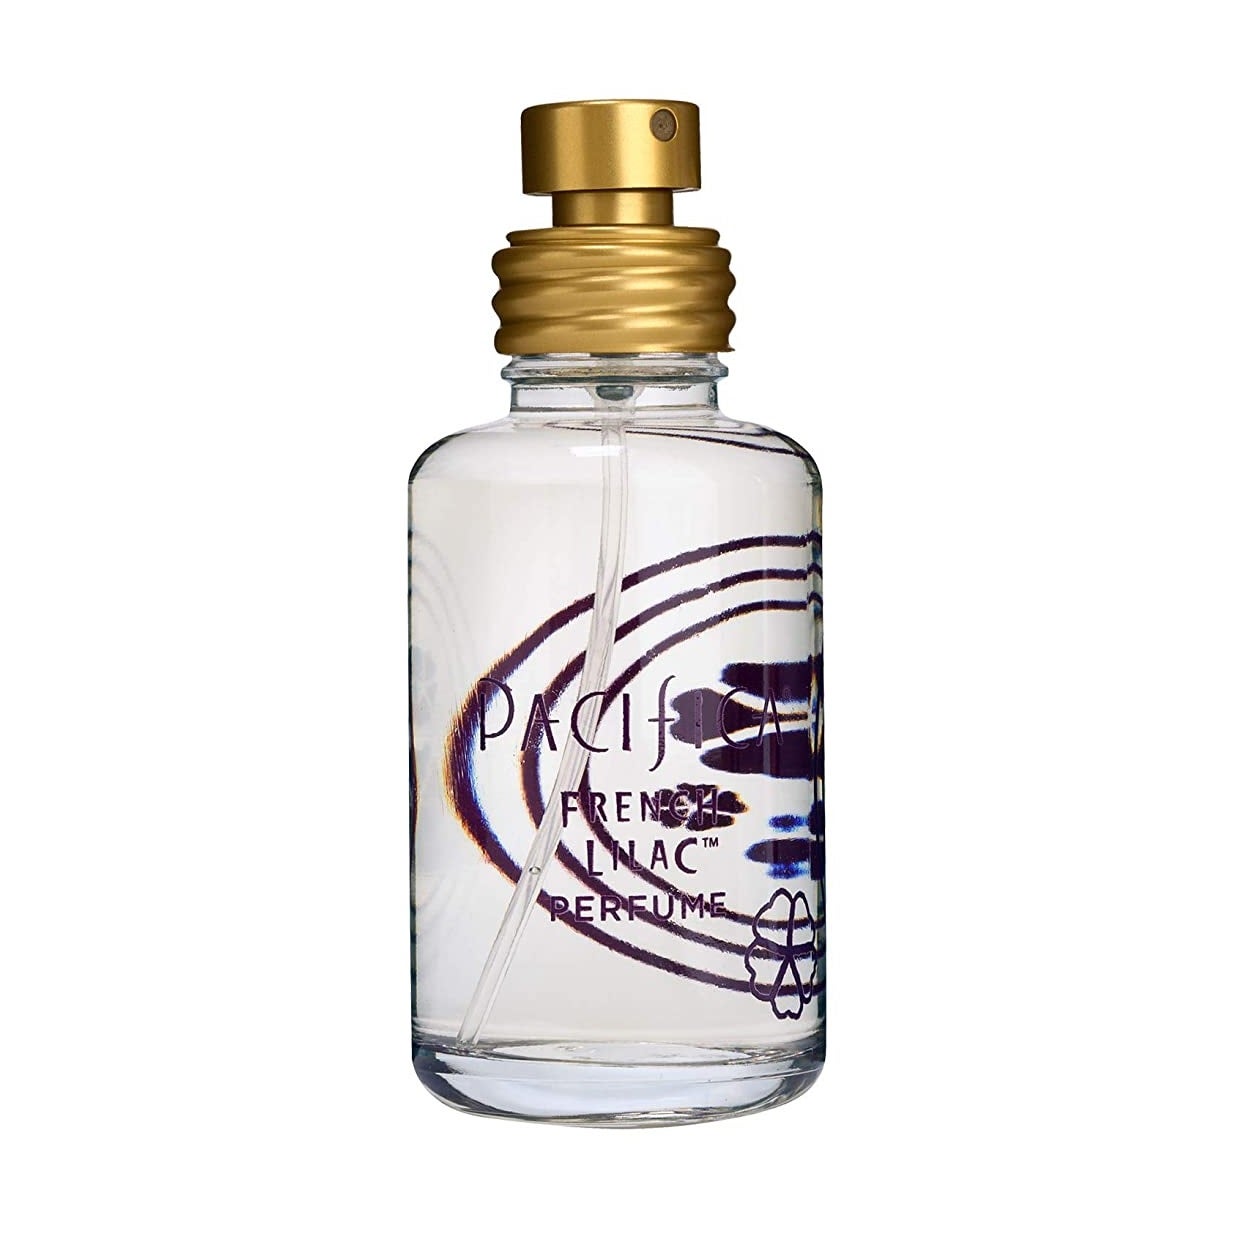 Pacifica French Lilac Women's Perfume